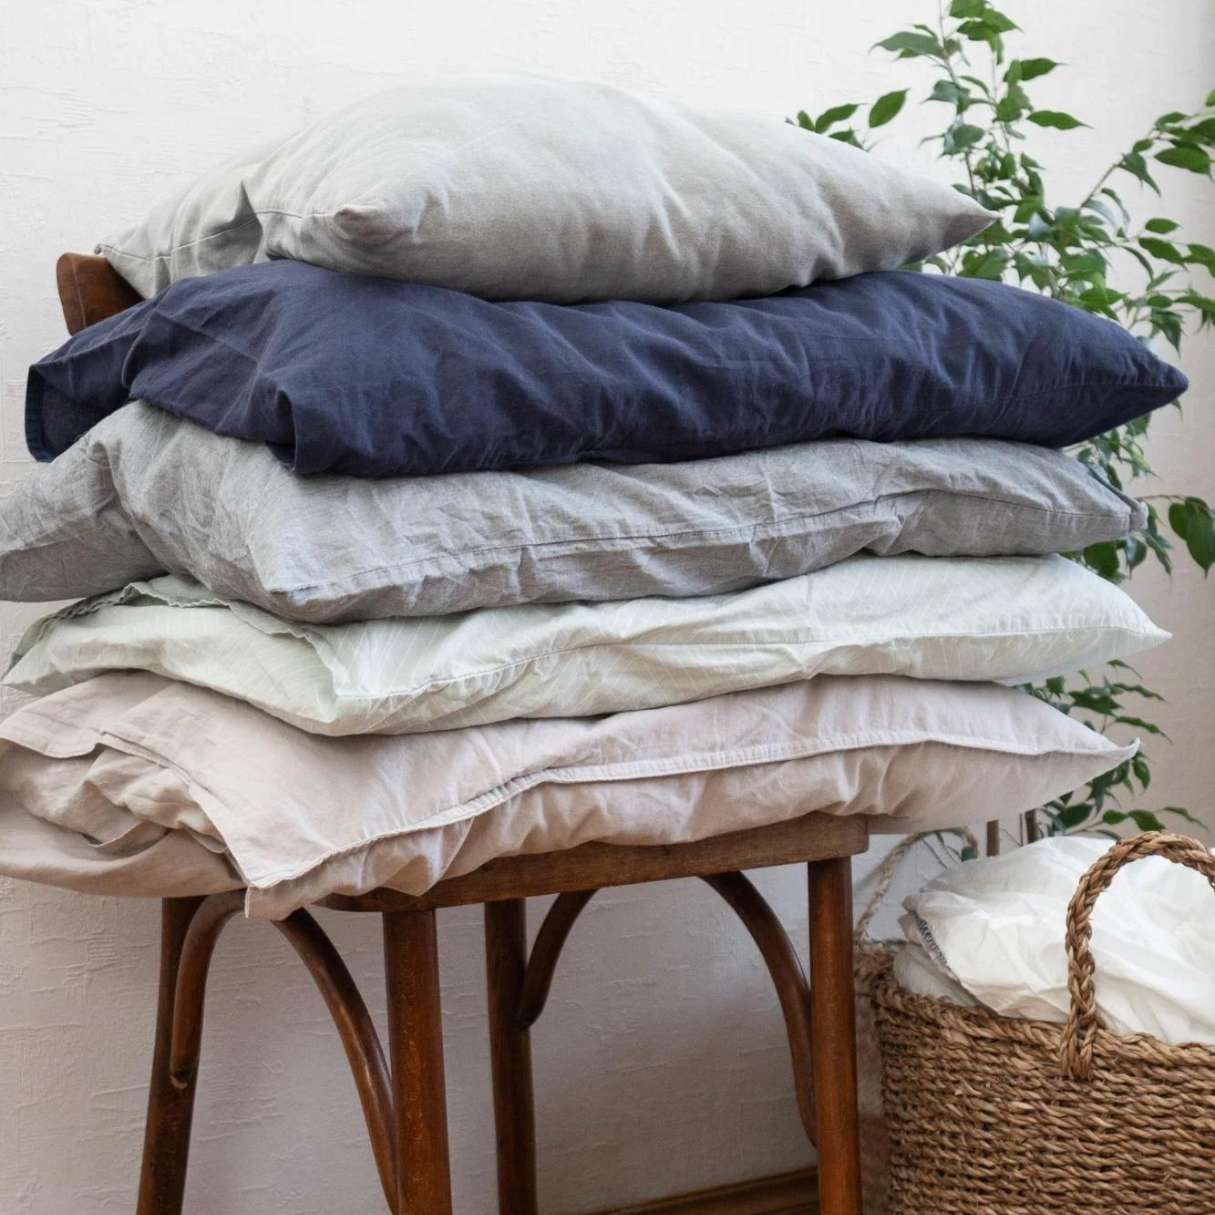 Where To Get Rid Of Old Pillows